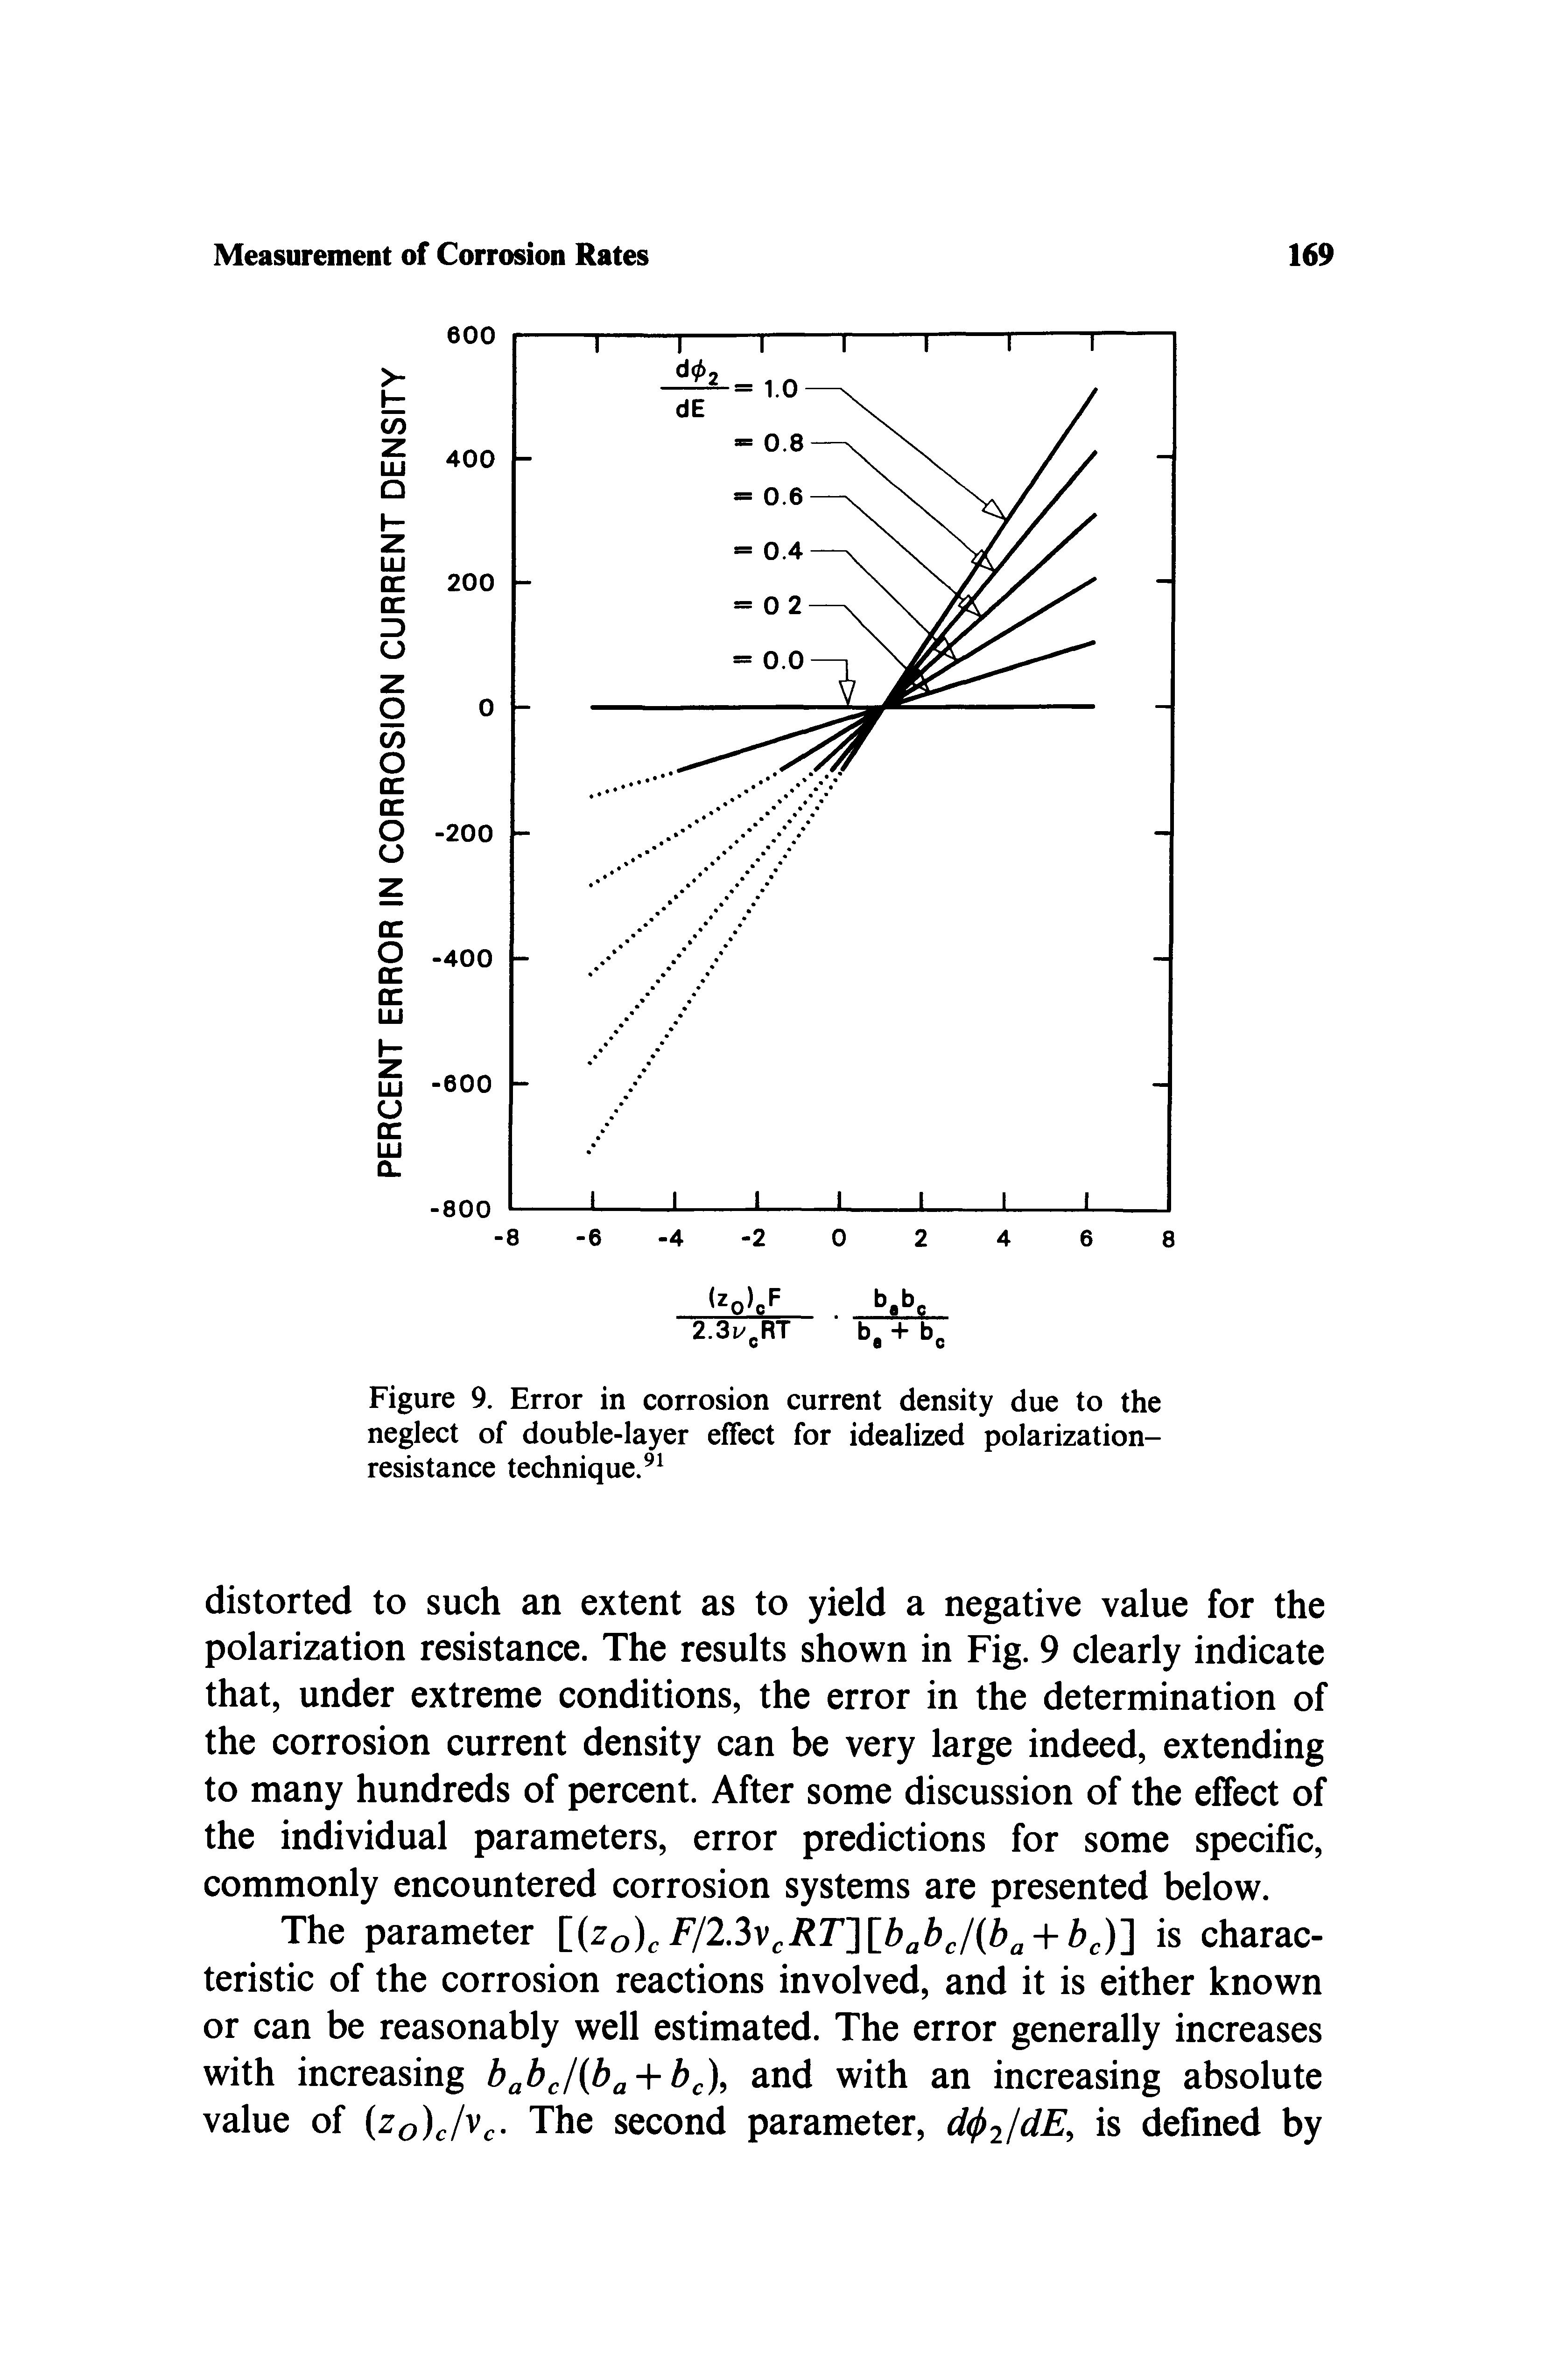 Figure 9. Error in corrosion current density due to the neglect of double-layer effect for idealized polarization-resistance technique. ...